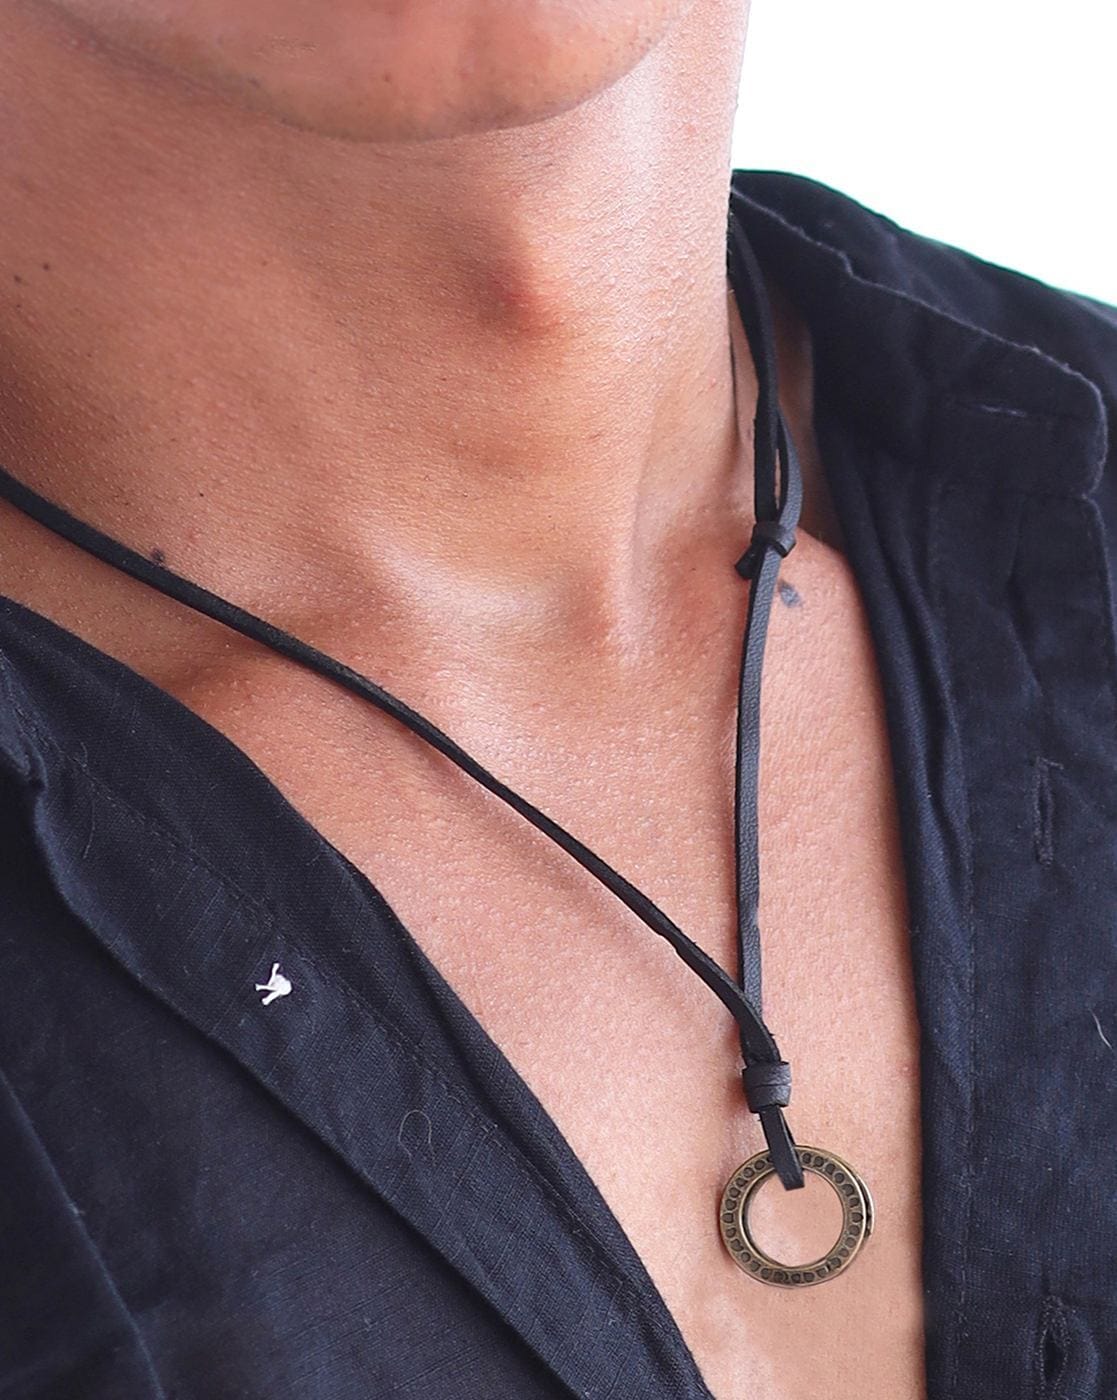 Mens Leather Necklace, Stainless Steel Magnetic Clasp,Mens Necklace,Mens  Jewelry, Groomsmen · Urban Survival Gear USA · Online Store Powered by  Storenvy